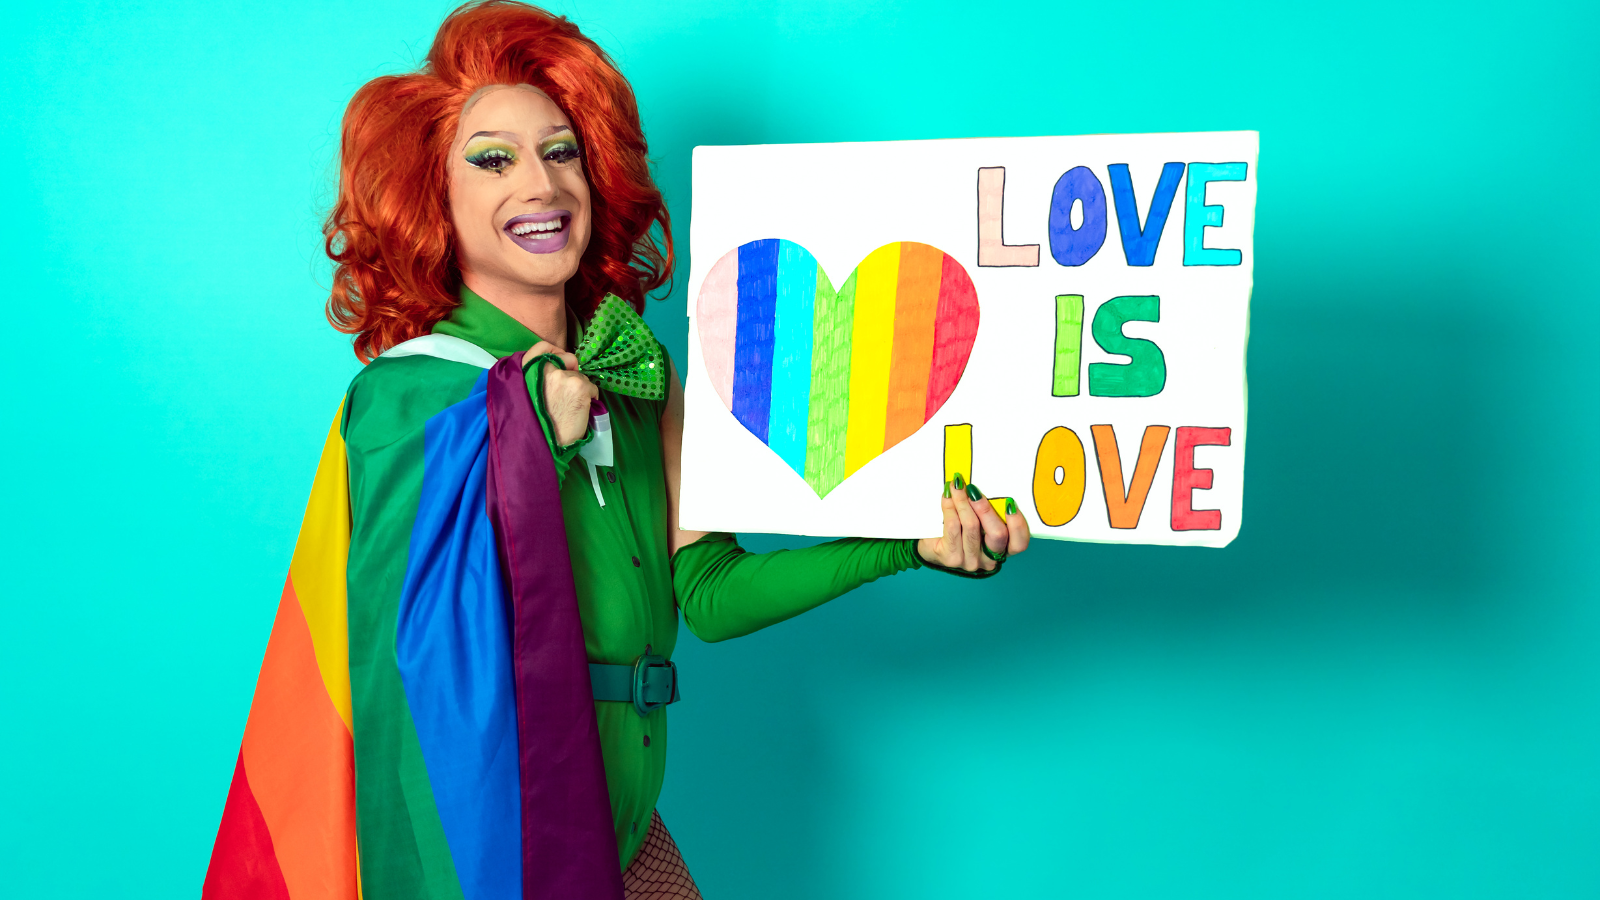 image of a drag queen holding a sign saying "love is love."